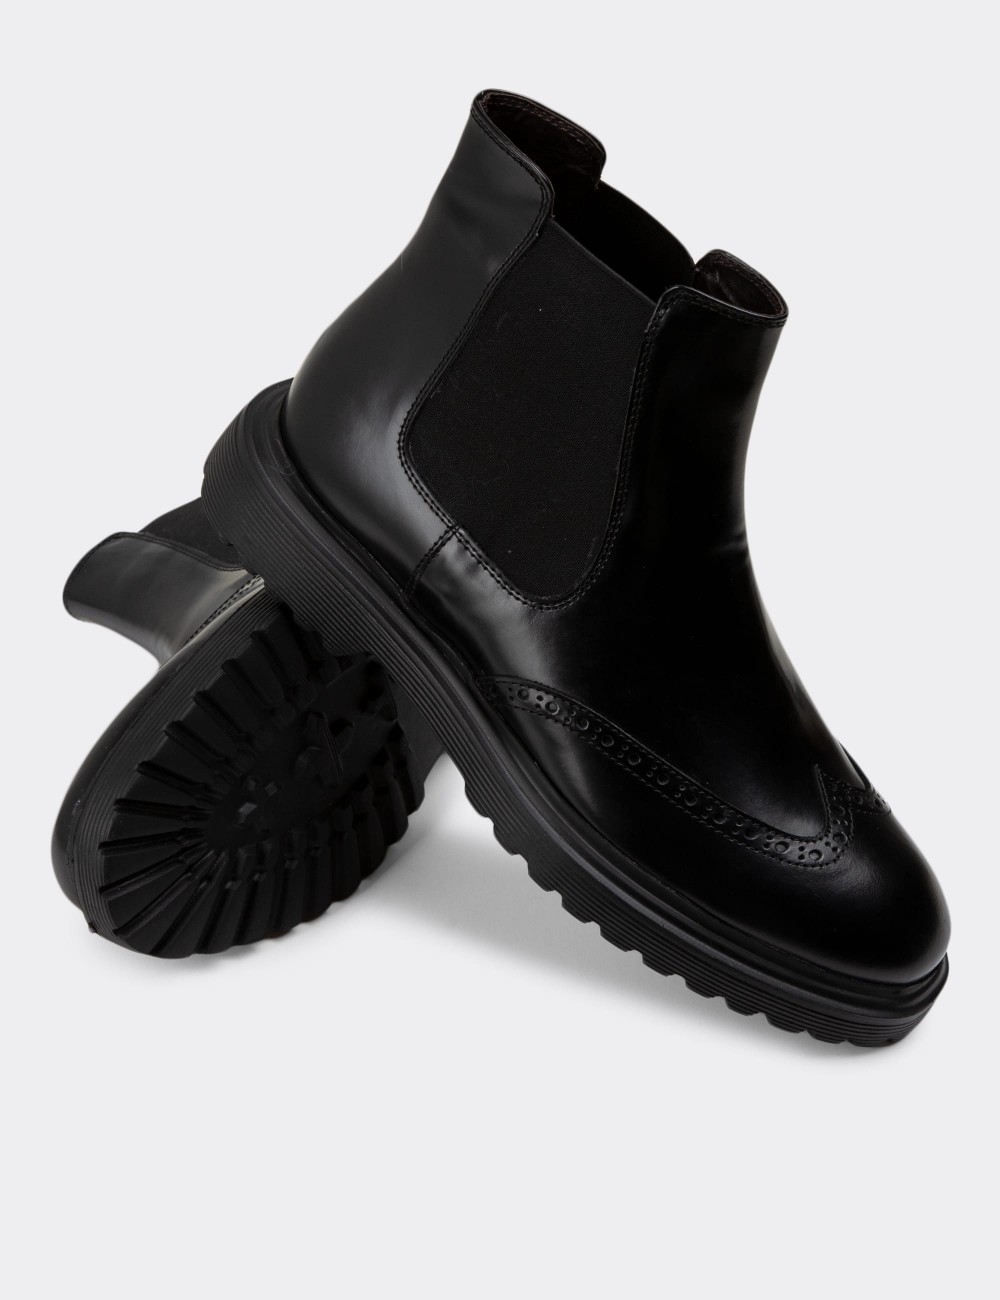 Black Leather Chelsea Boots - 01848MSYHE03